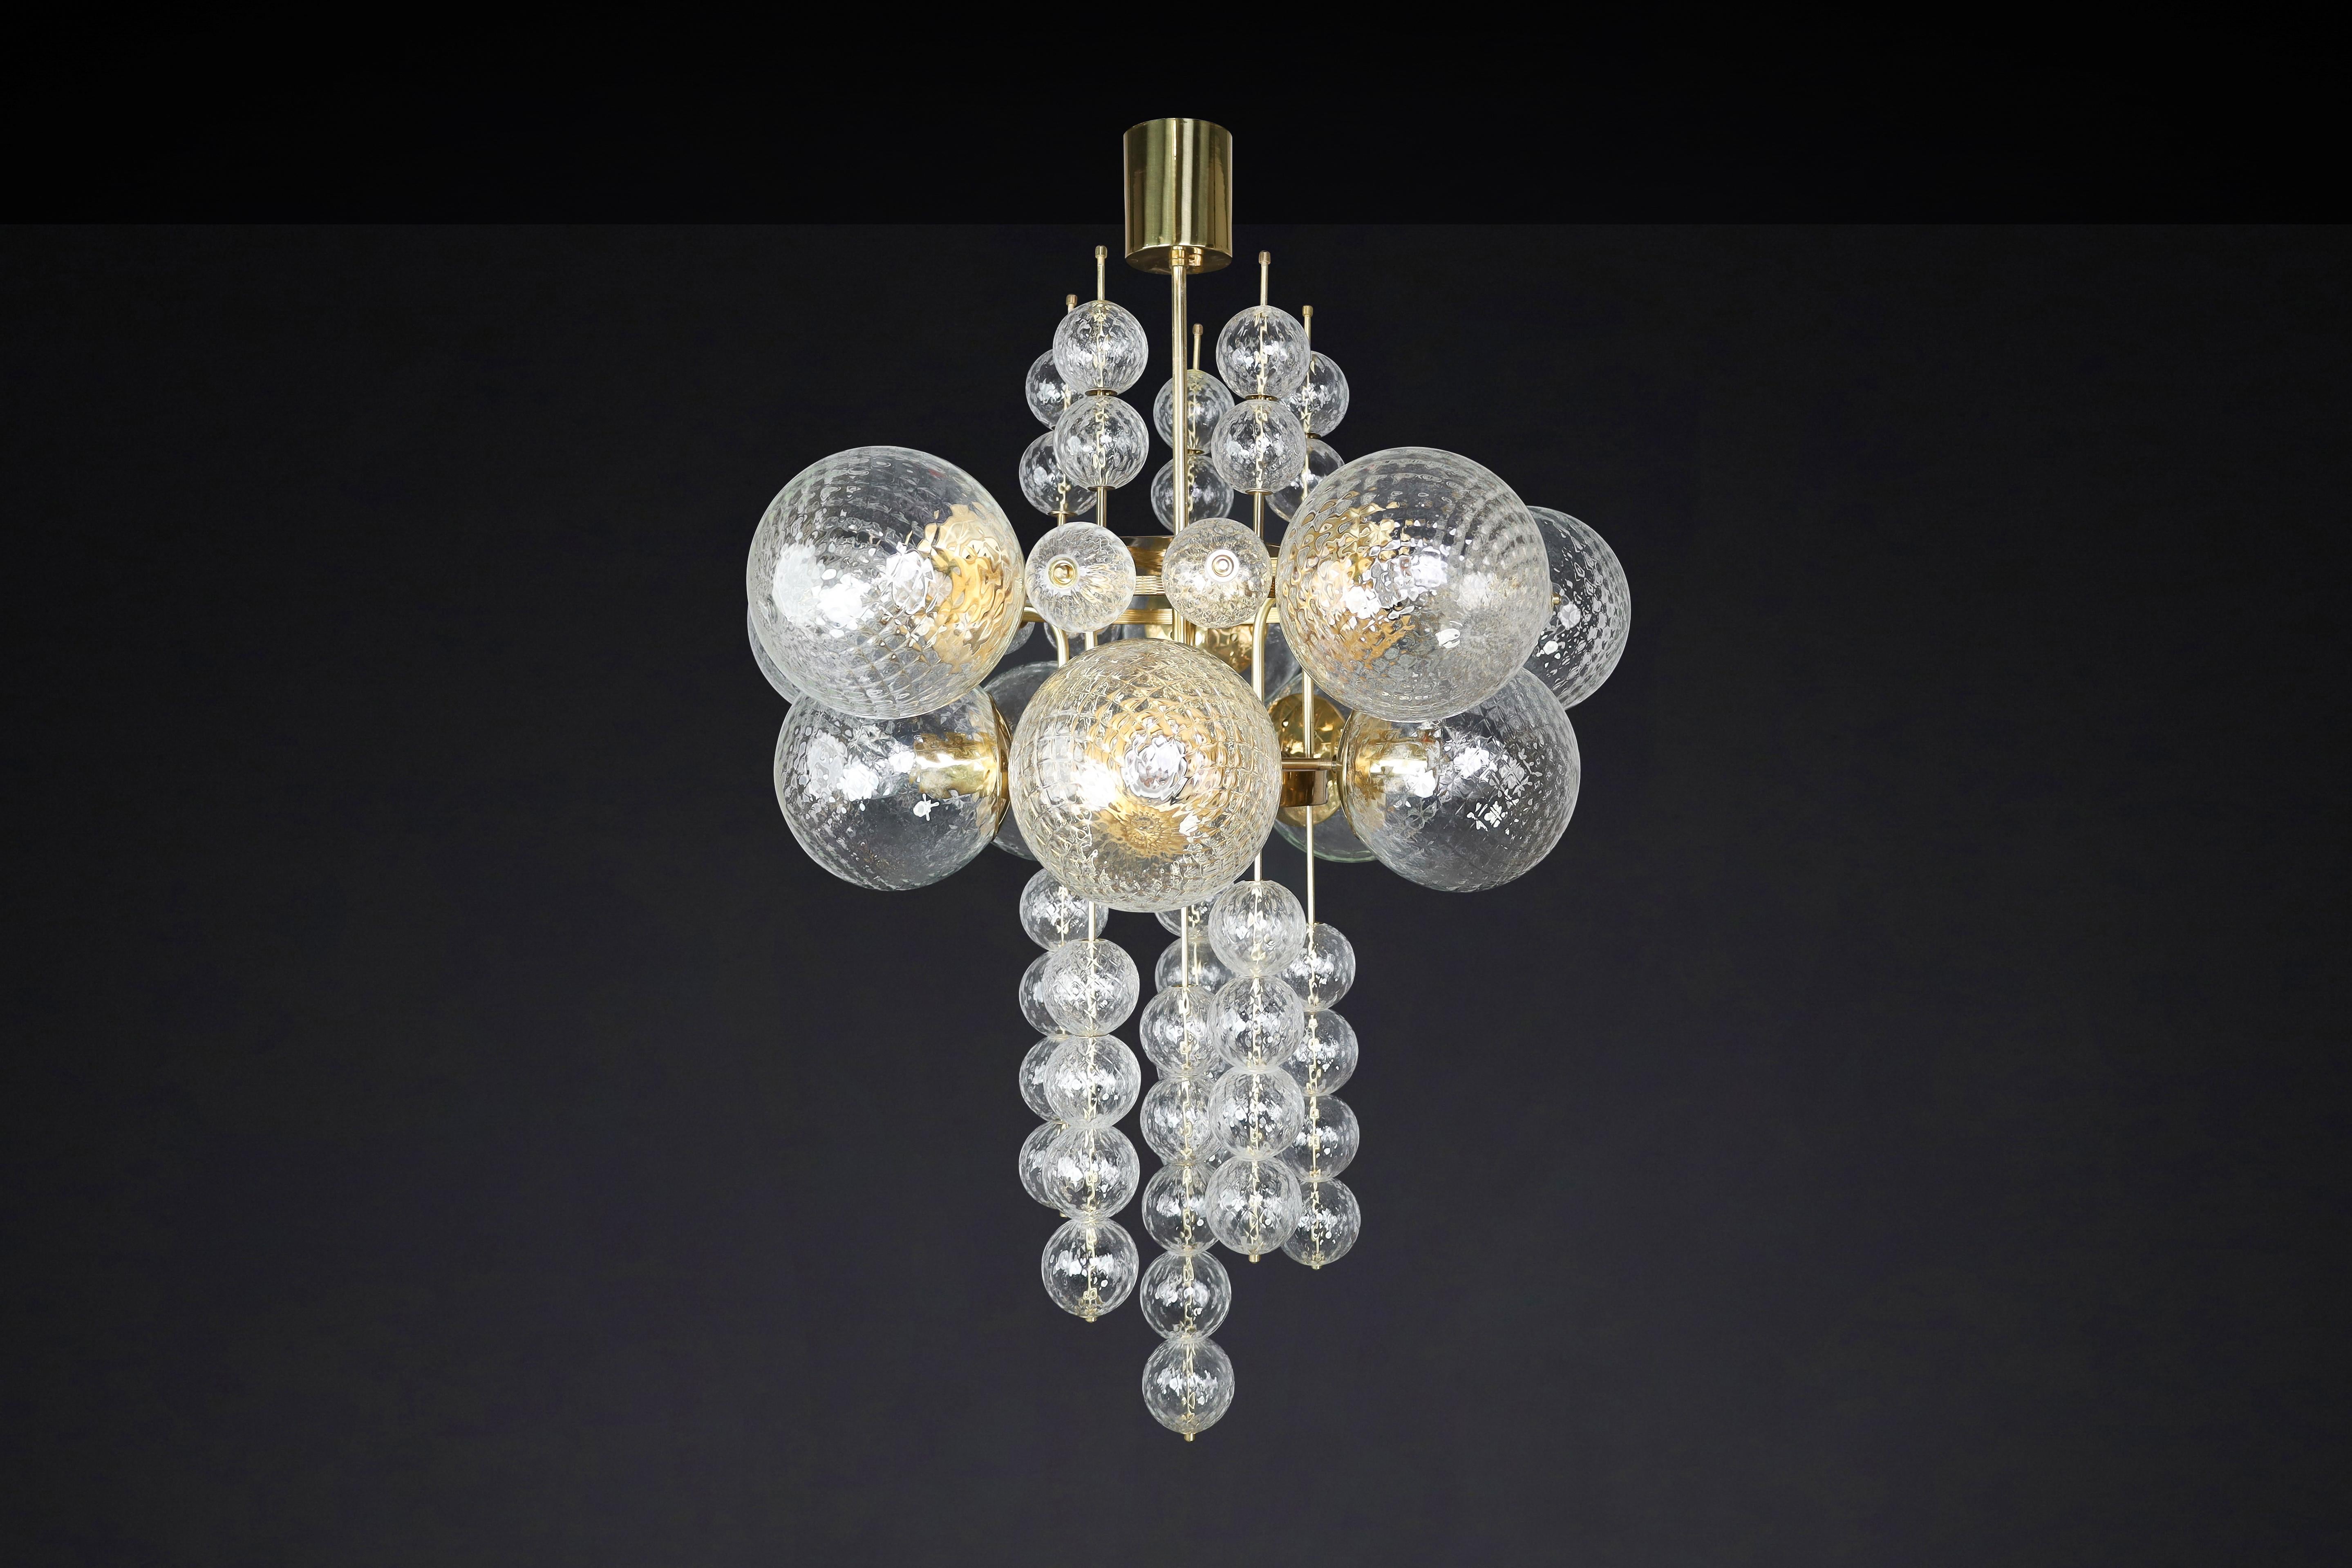 Large Chandelier with brass fixture and hand-blowed glass globes by Preciosa, Czechia, 1960s

This Chandelier was made in the 1960s and is from a grand hotel in Prague. It features a brass fixture and hand-blown glass globes created by the famous